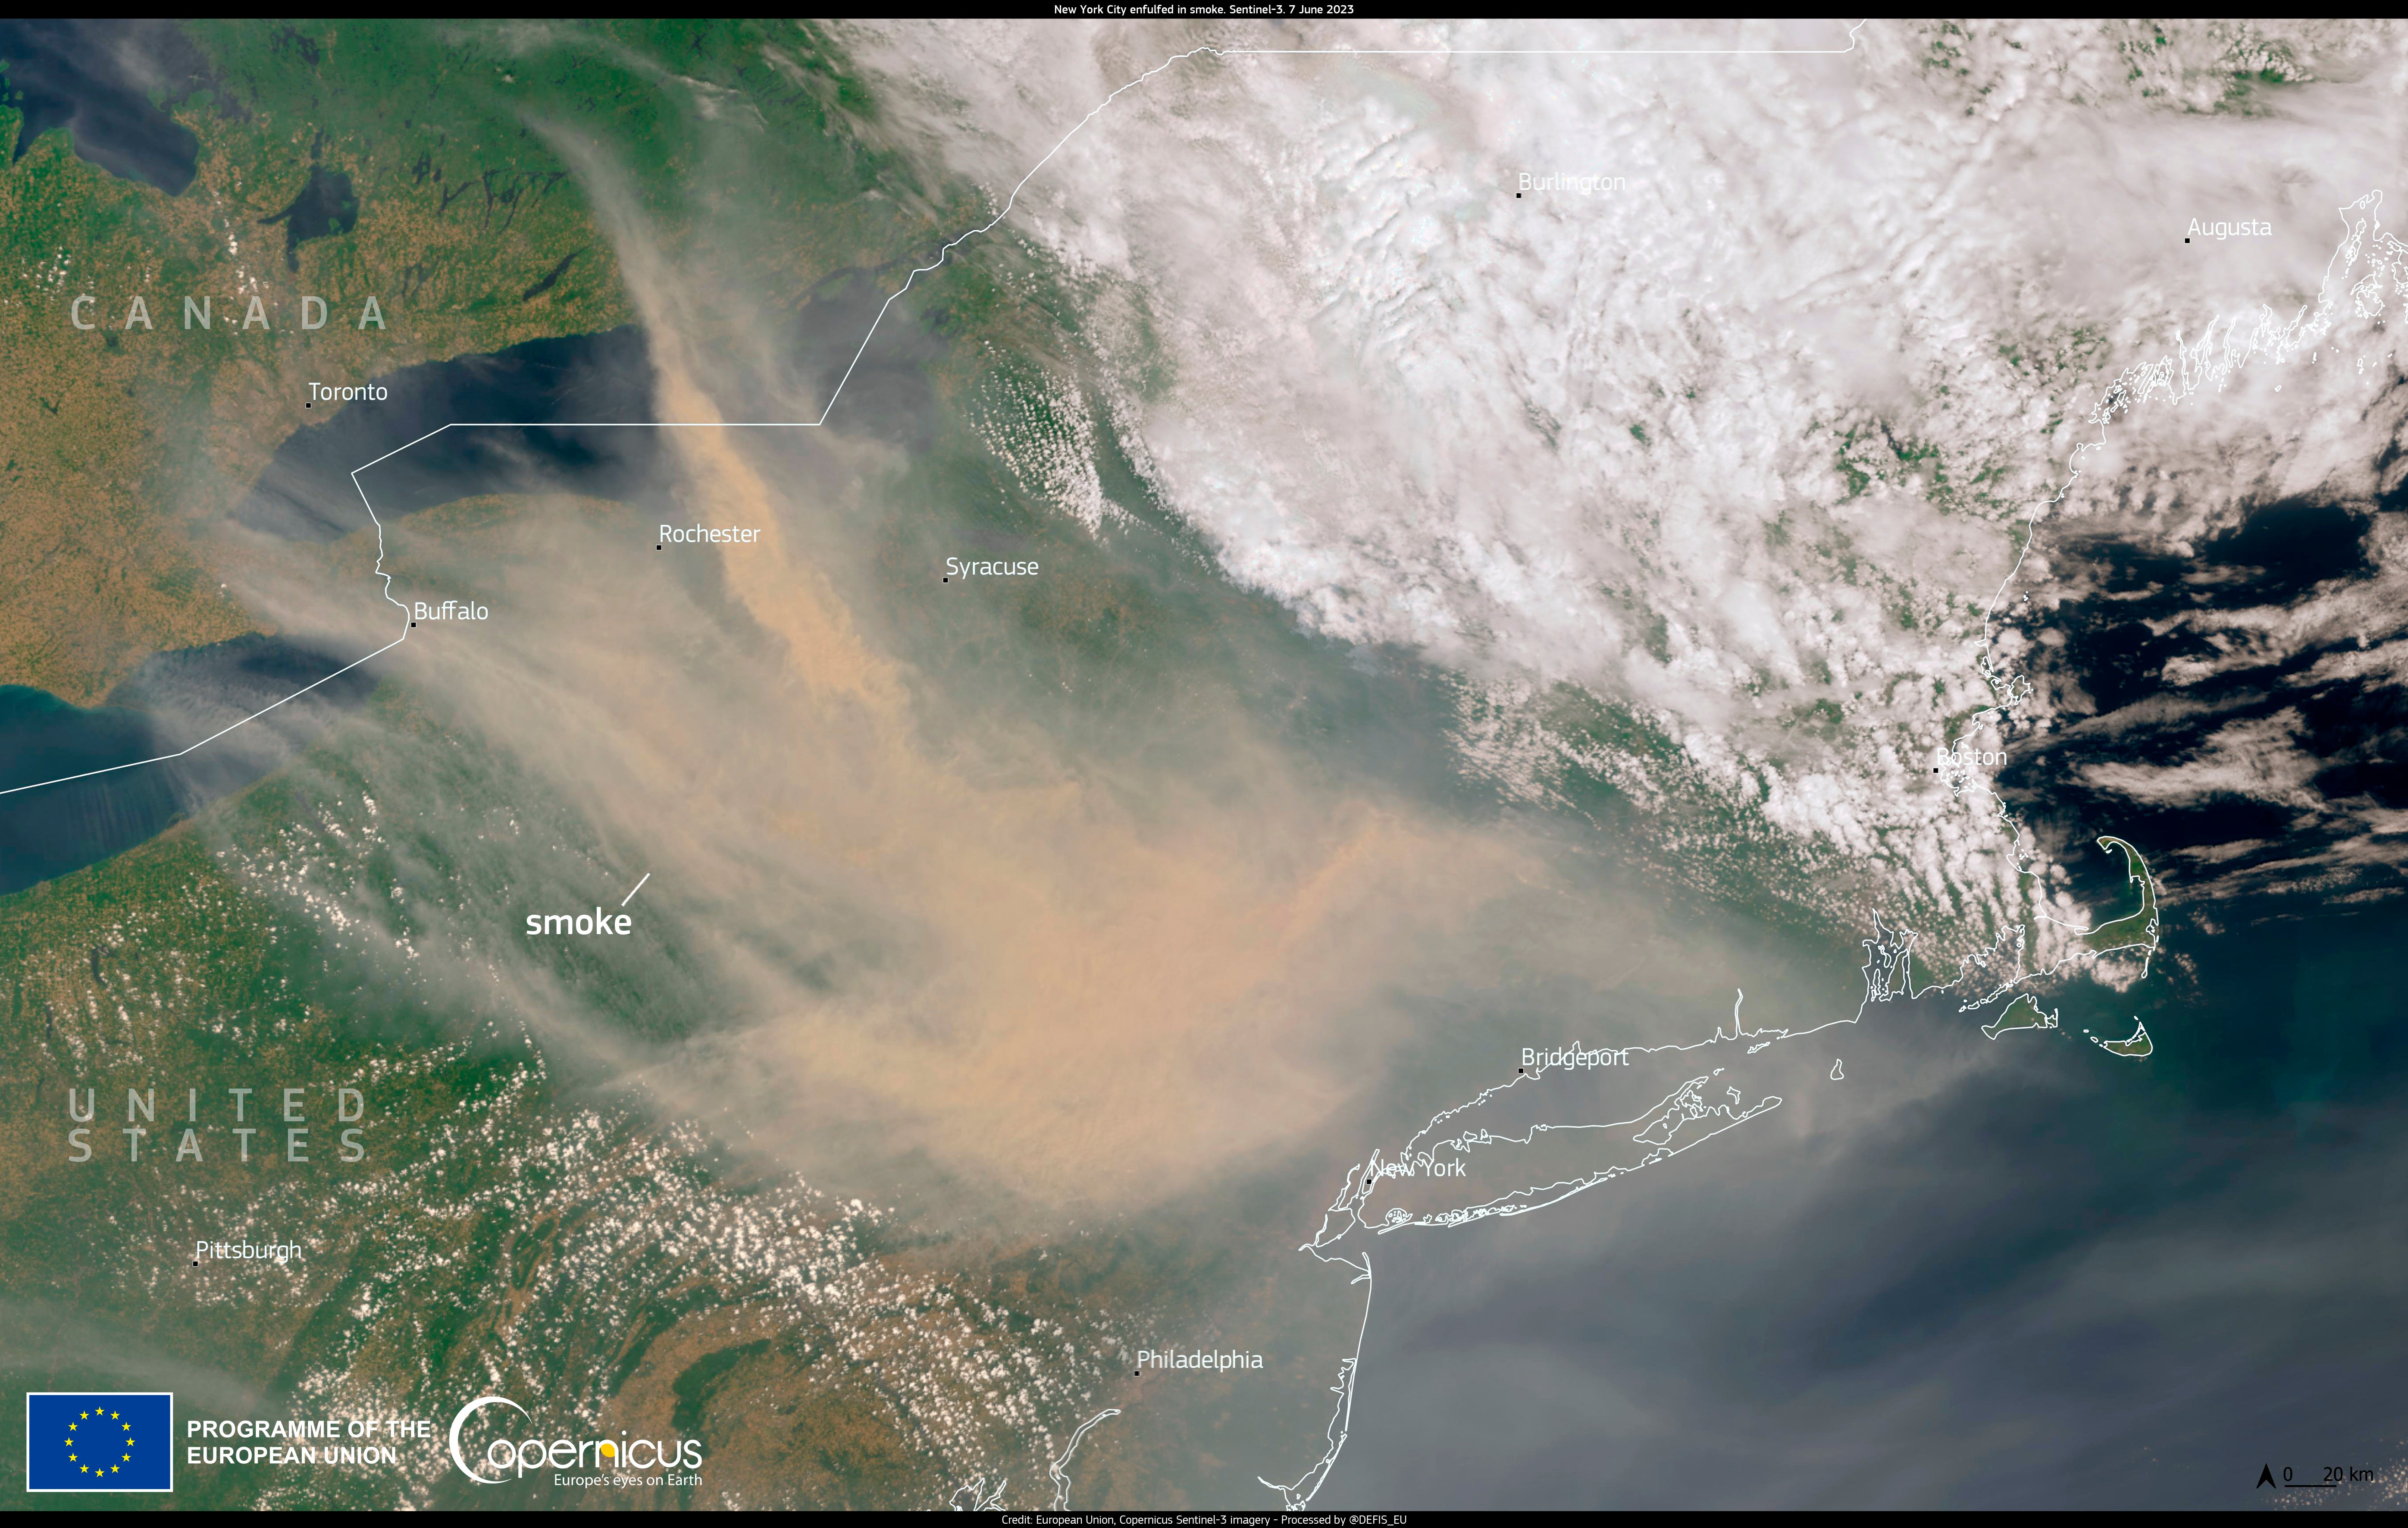 Plumes from the Canadian fires drift over the East Coast